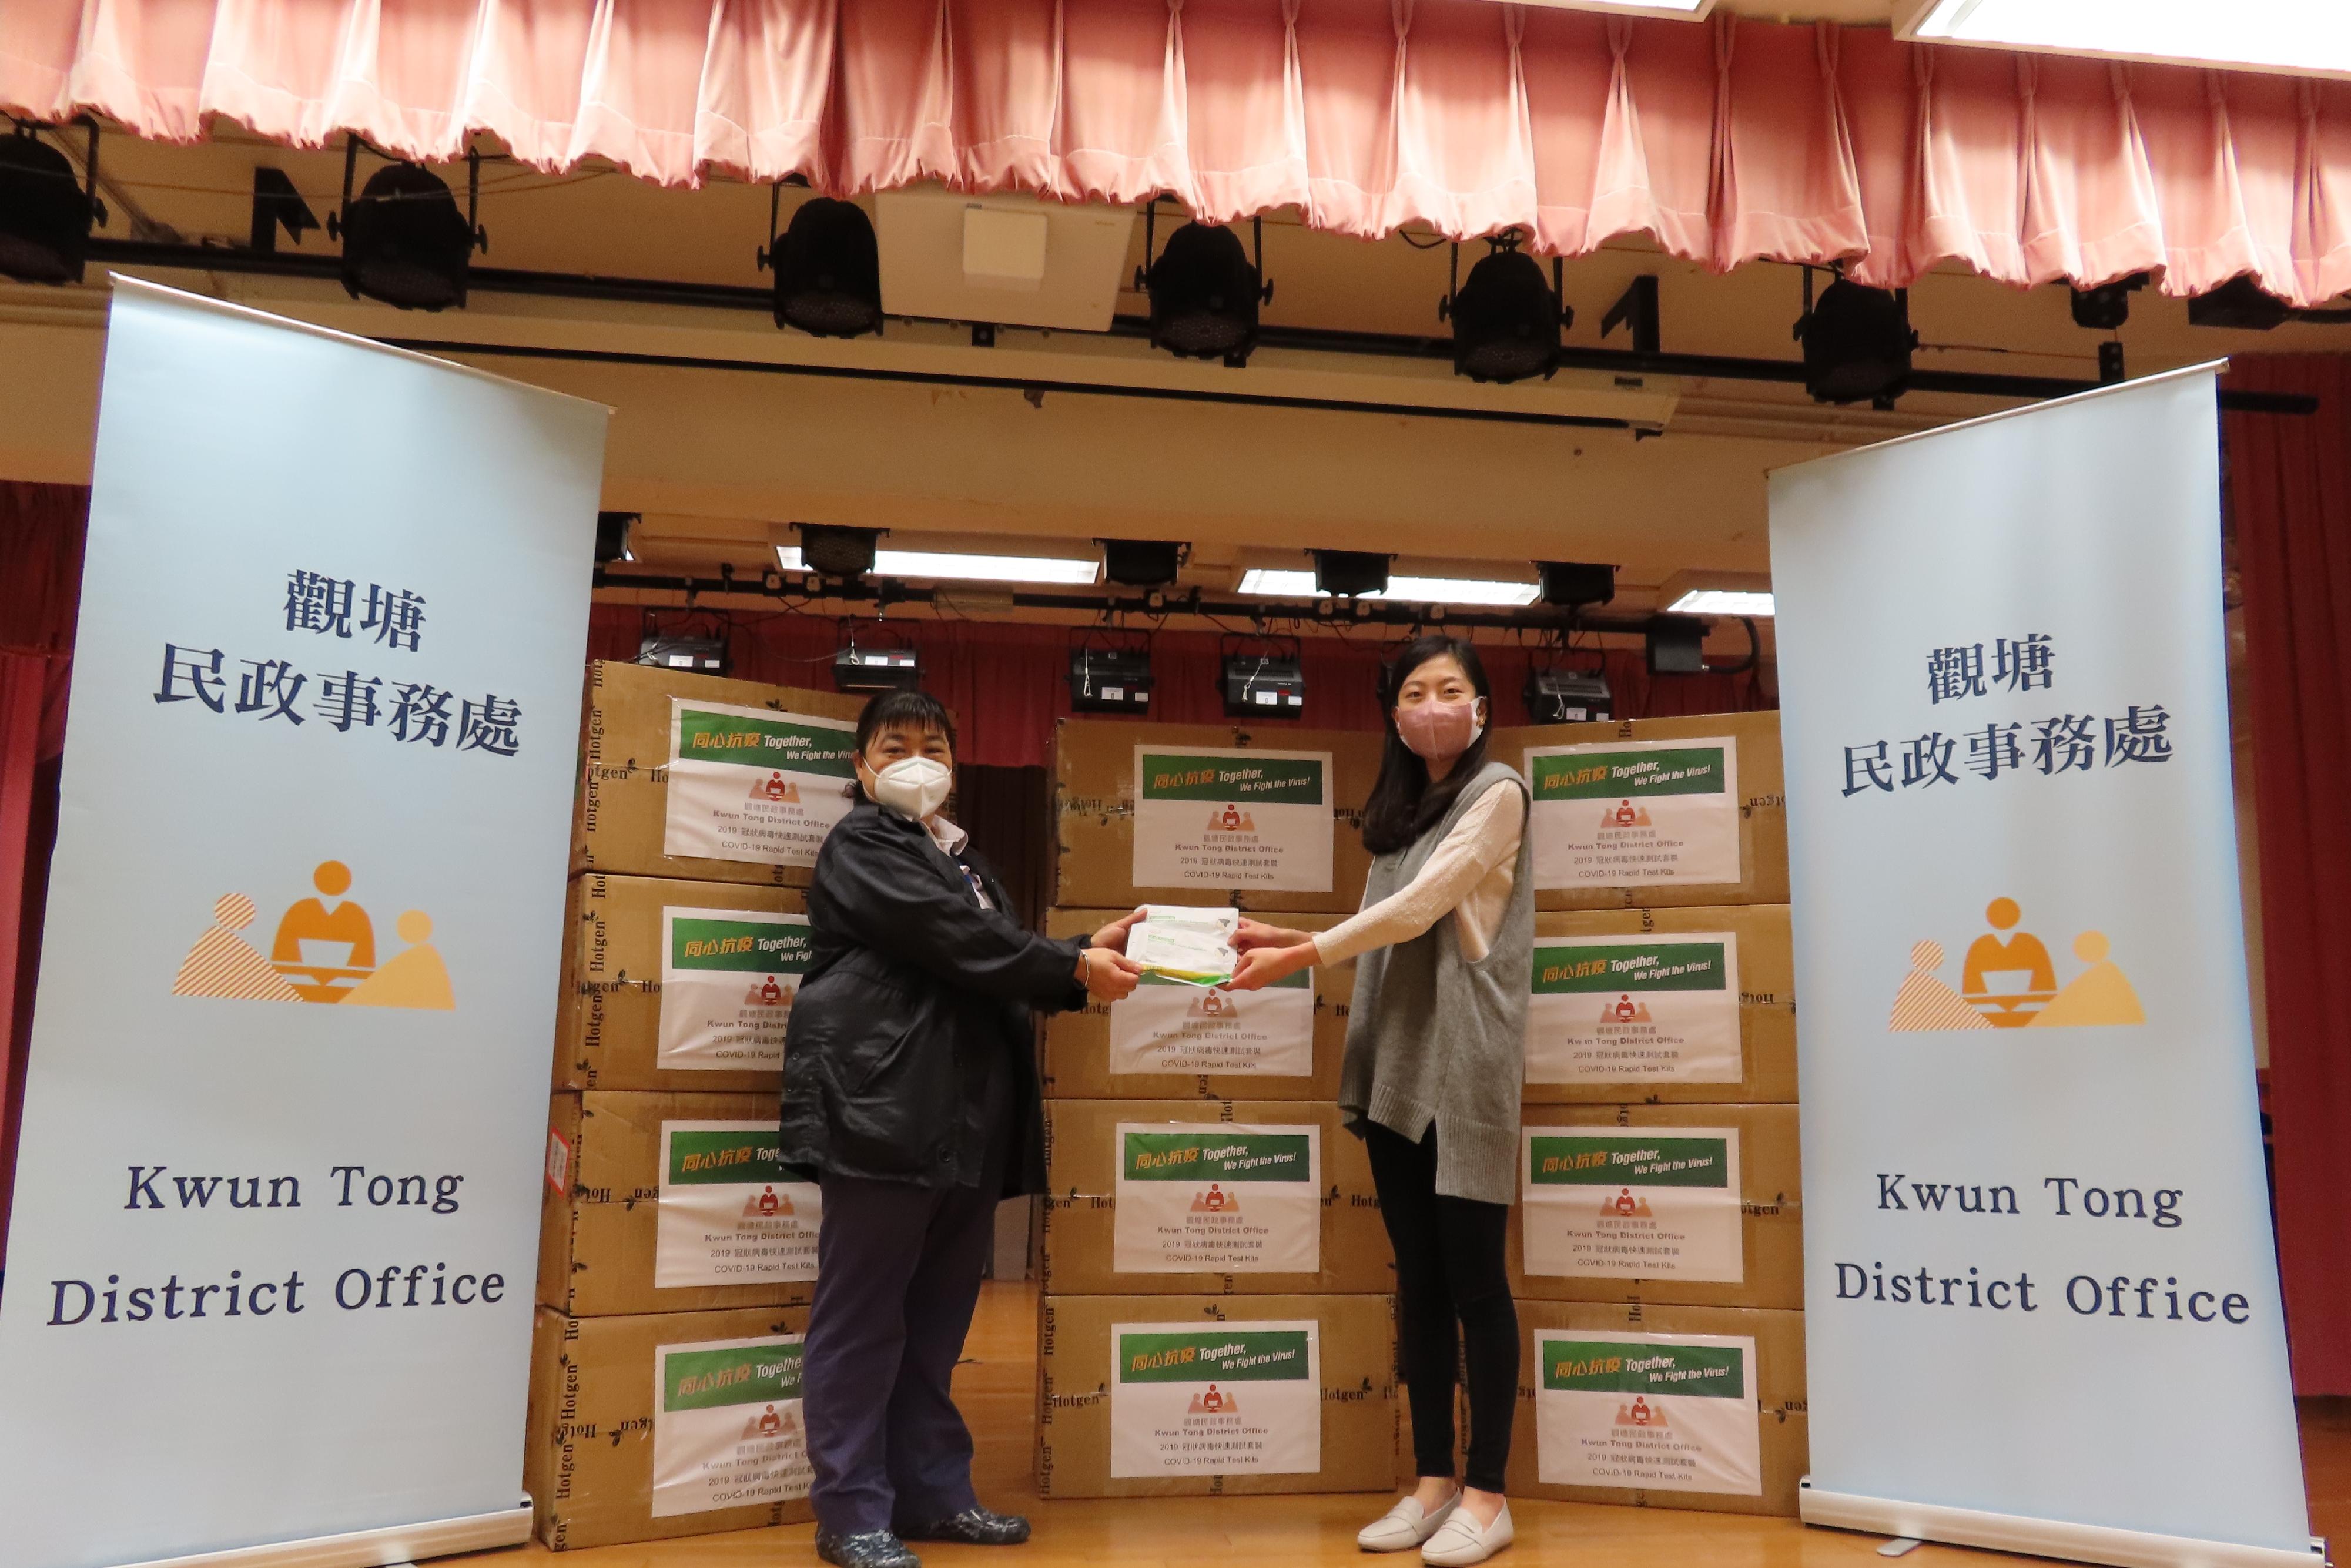 The Kwun Tong District Office today (March 24) distributed COVID-19 rapid test kits to households, cleansing workers and property management staff living and working in Po Tat Estate for voluntary testing through the property management company.

